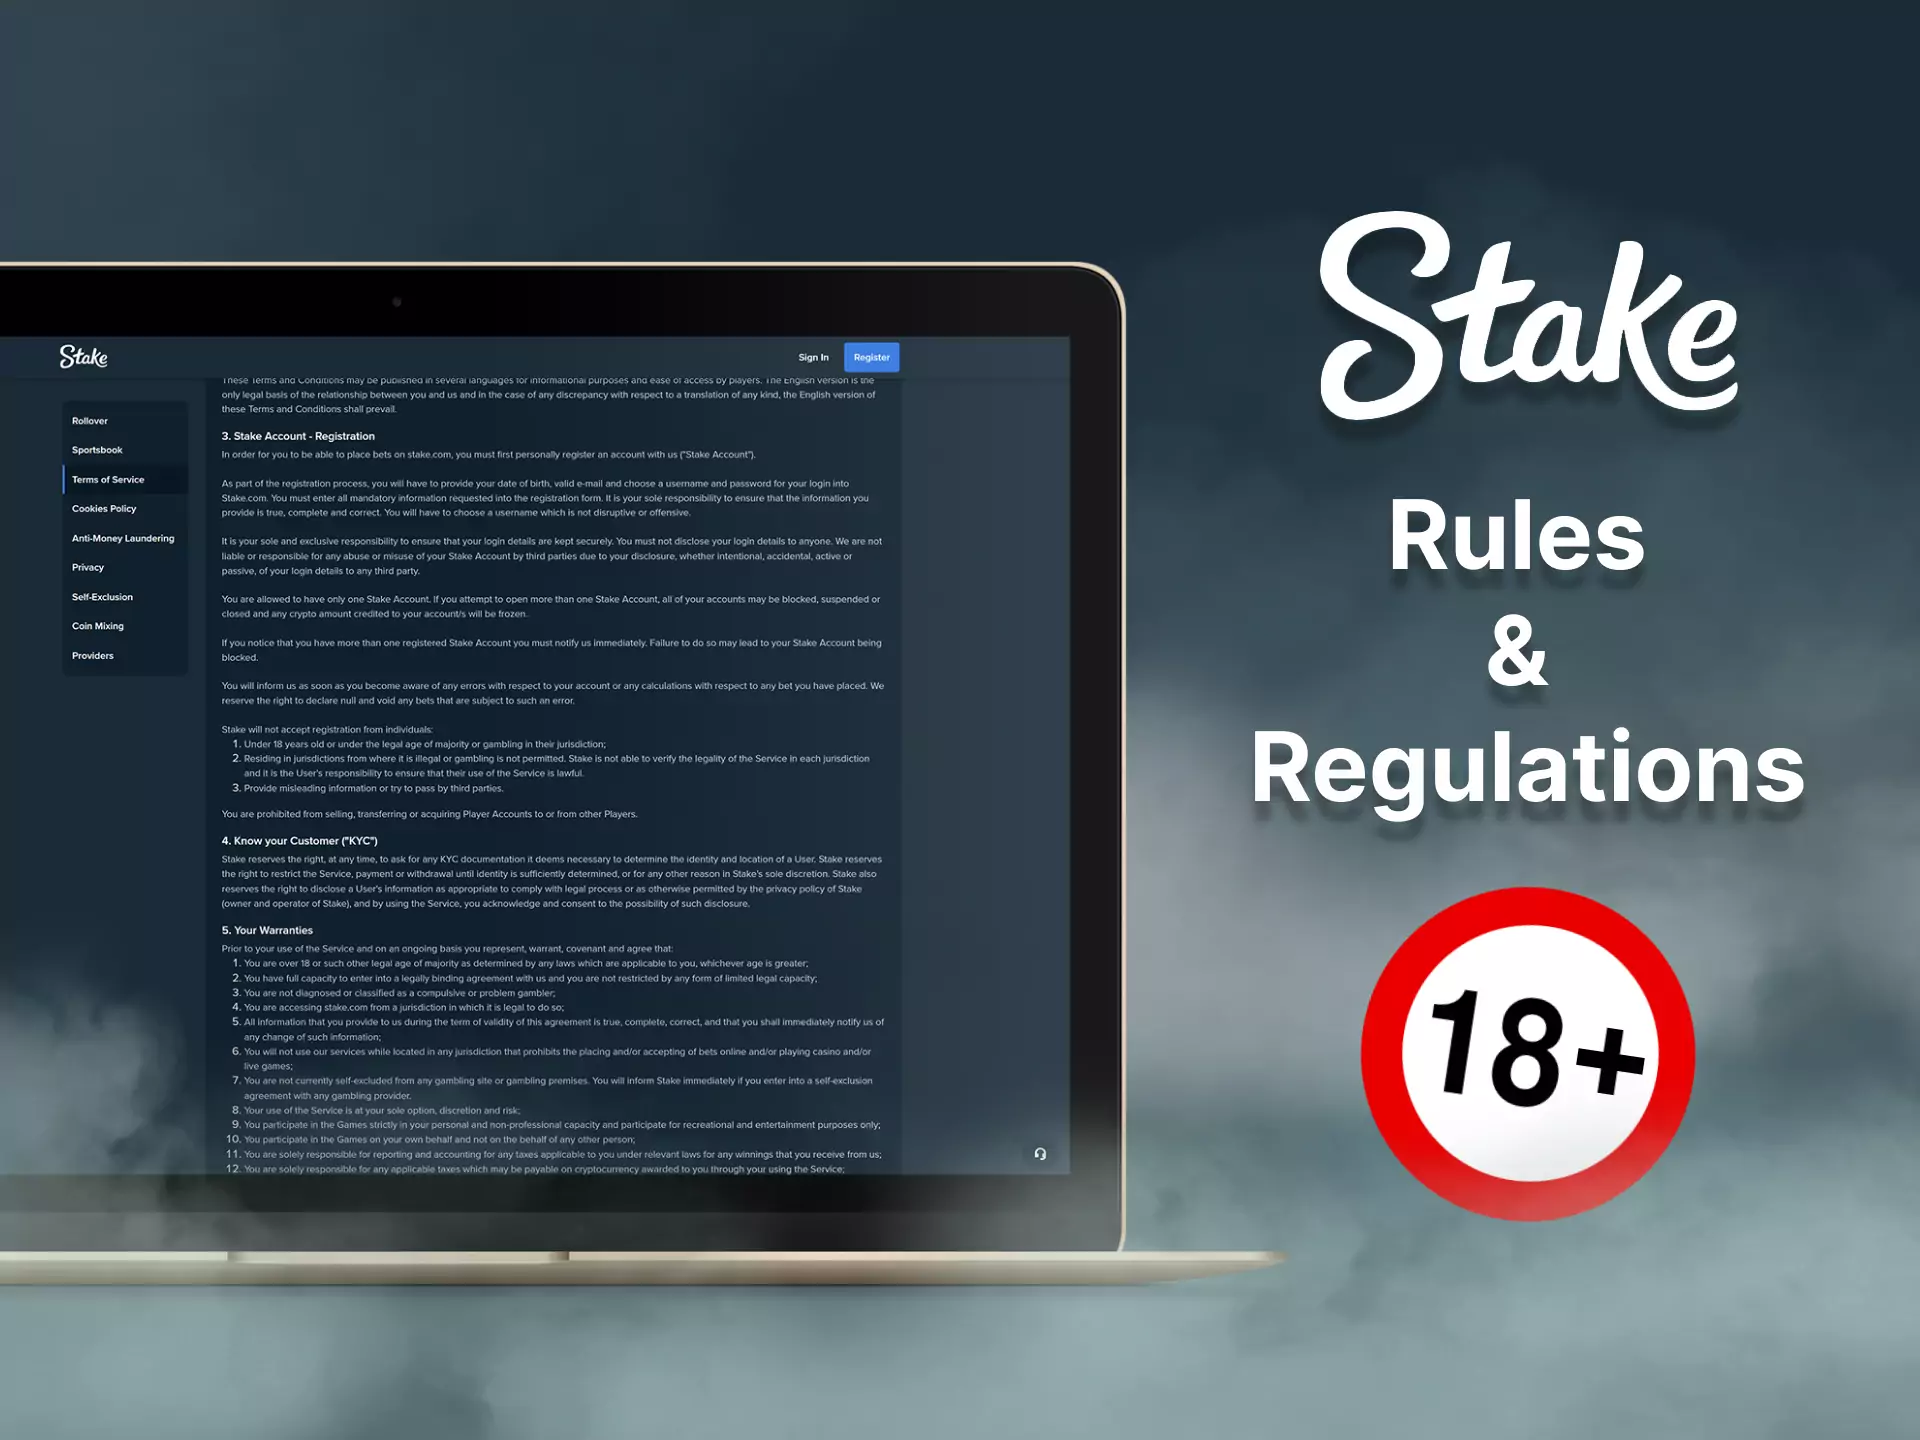 Follow the rules of betting on Stake not to be banned on the platform.